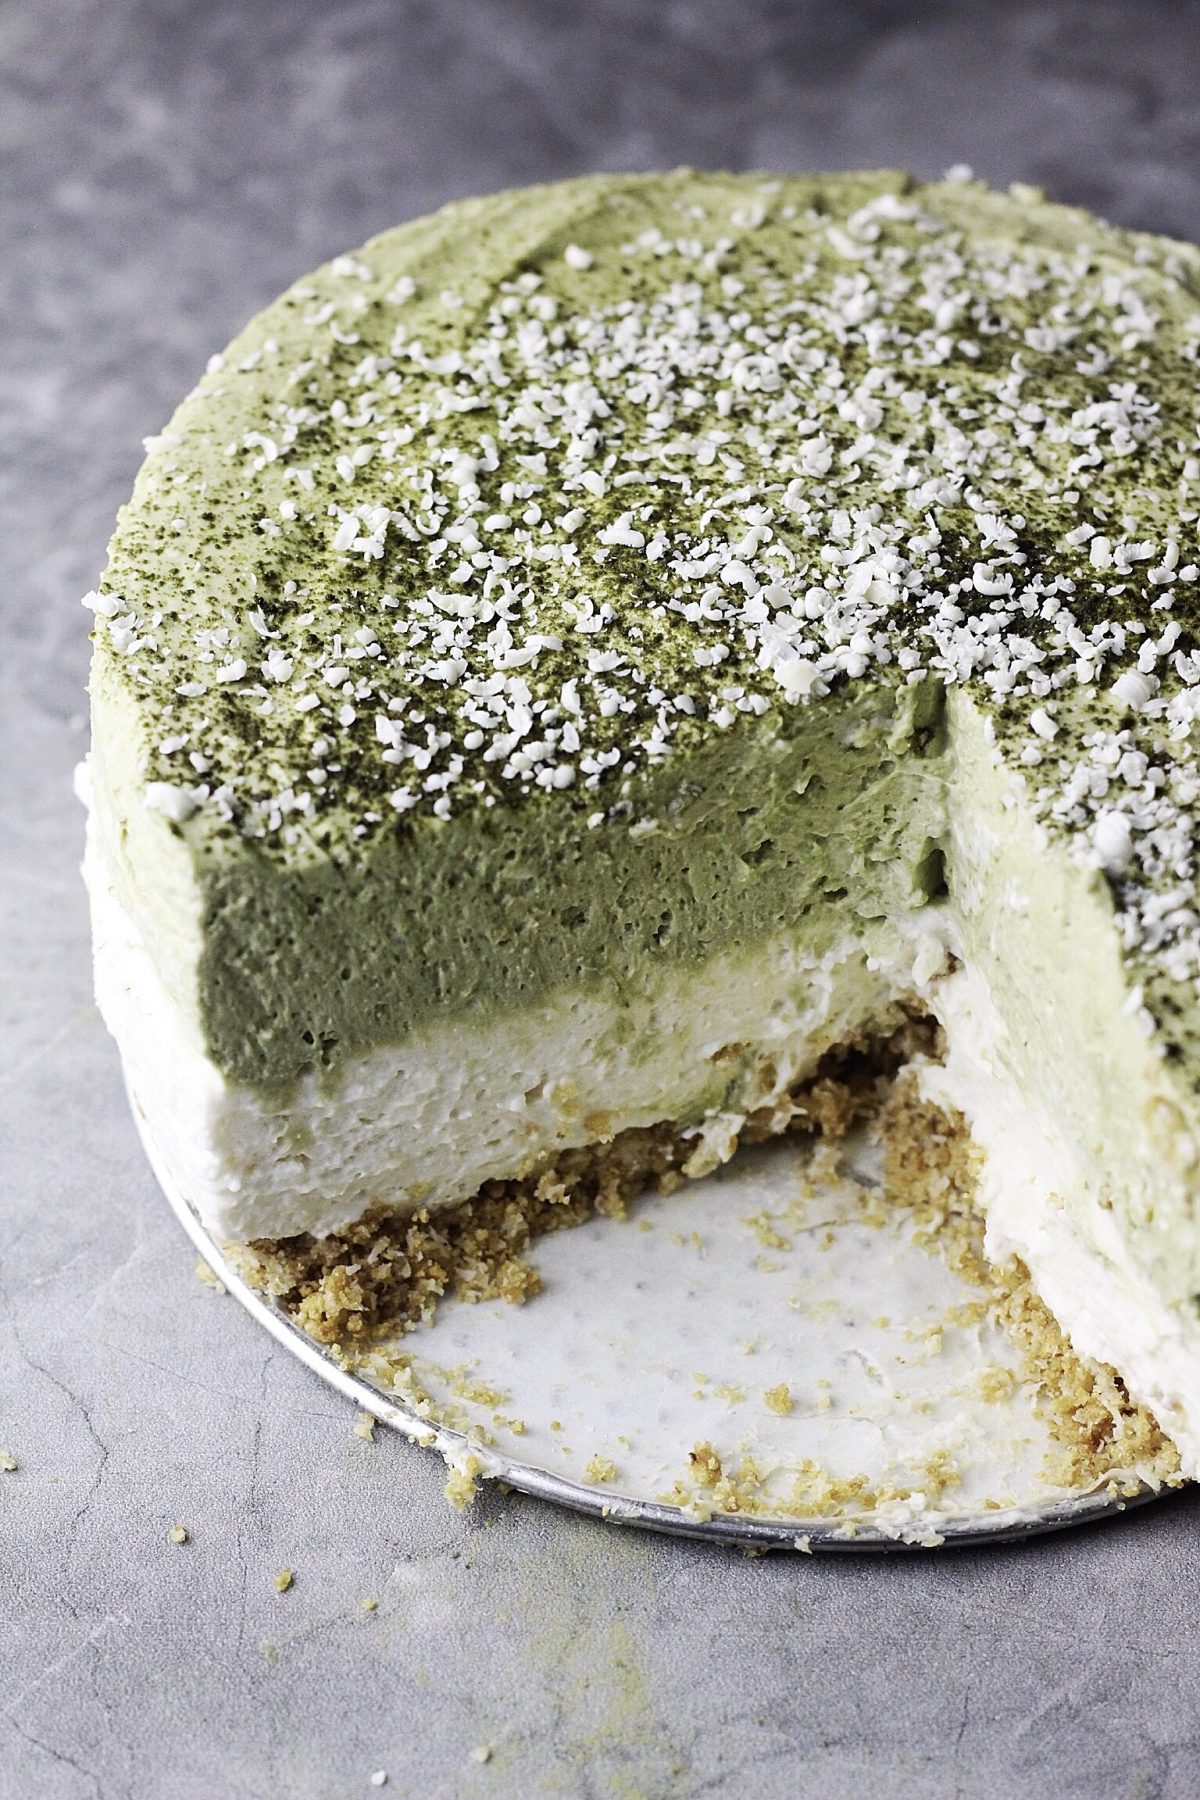 Three quarters of our no-bake matcha (green tea) cheesecake on a gray tile.